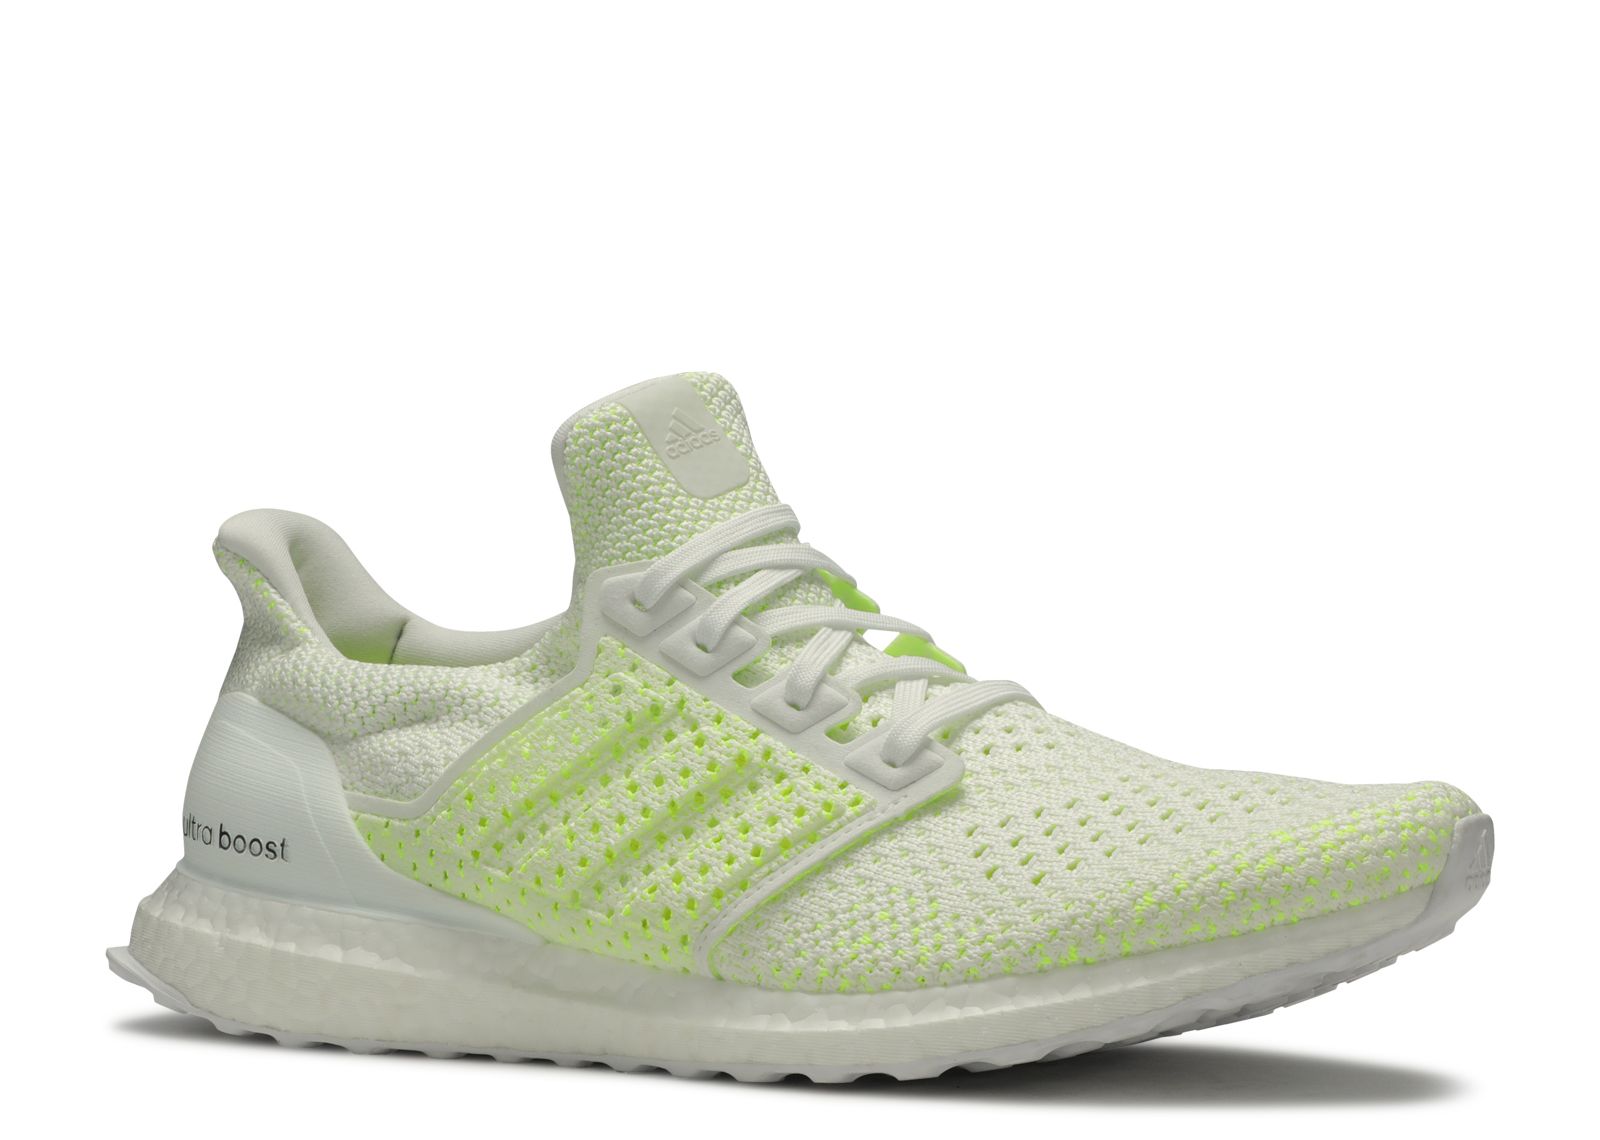 adidas ultra boost clima footwear white/clear brown